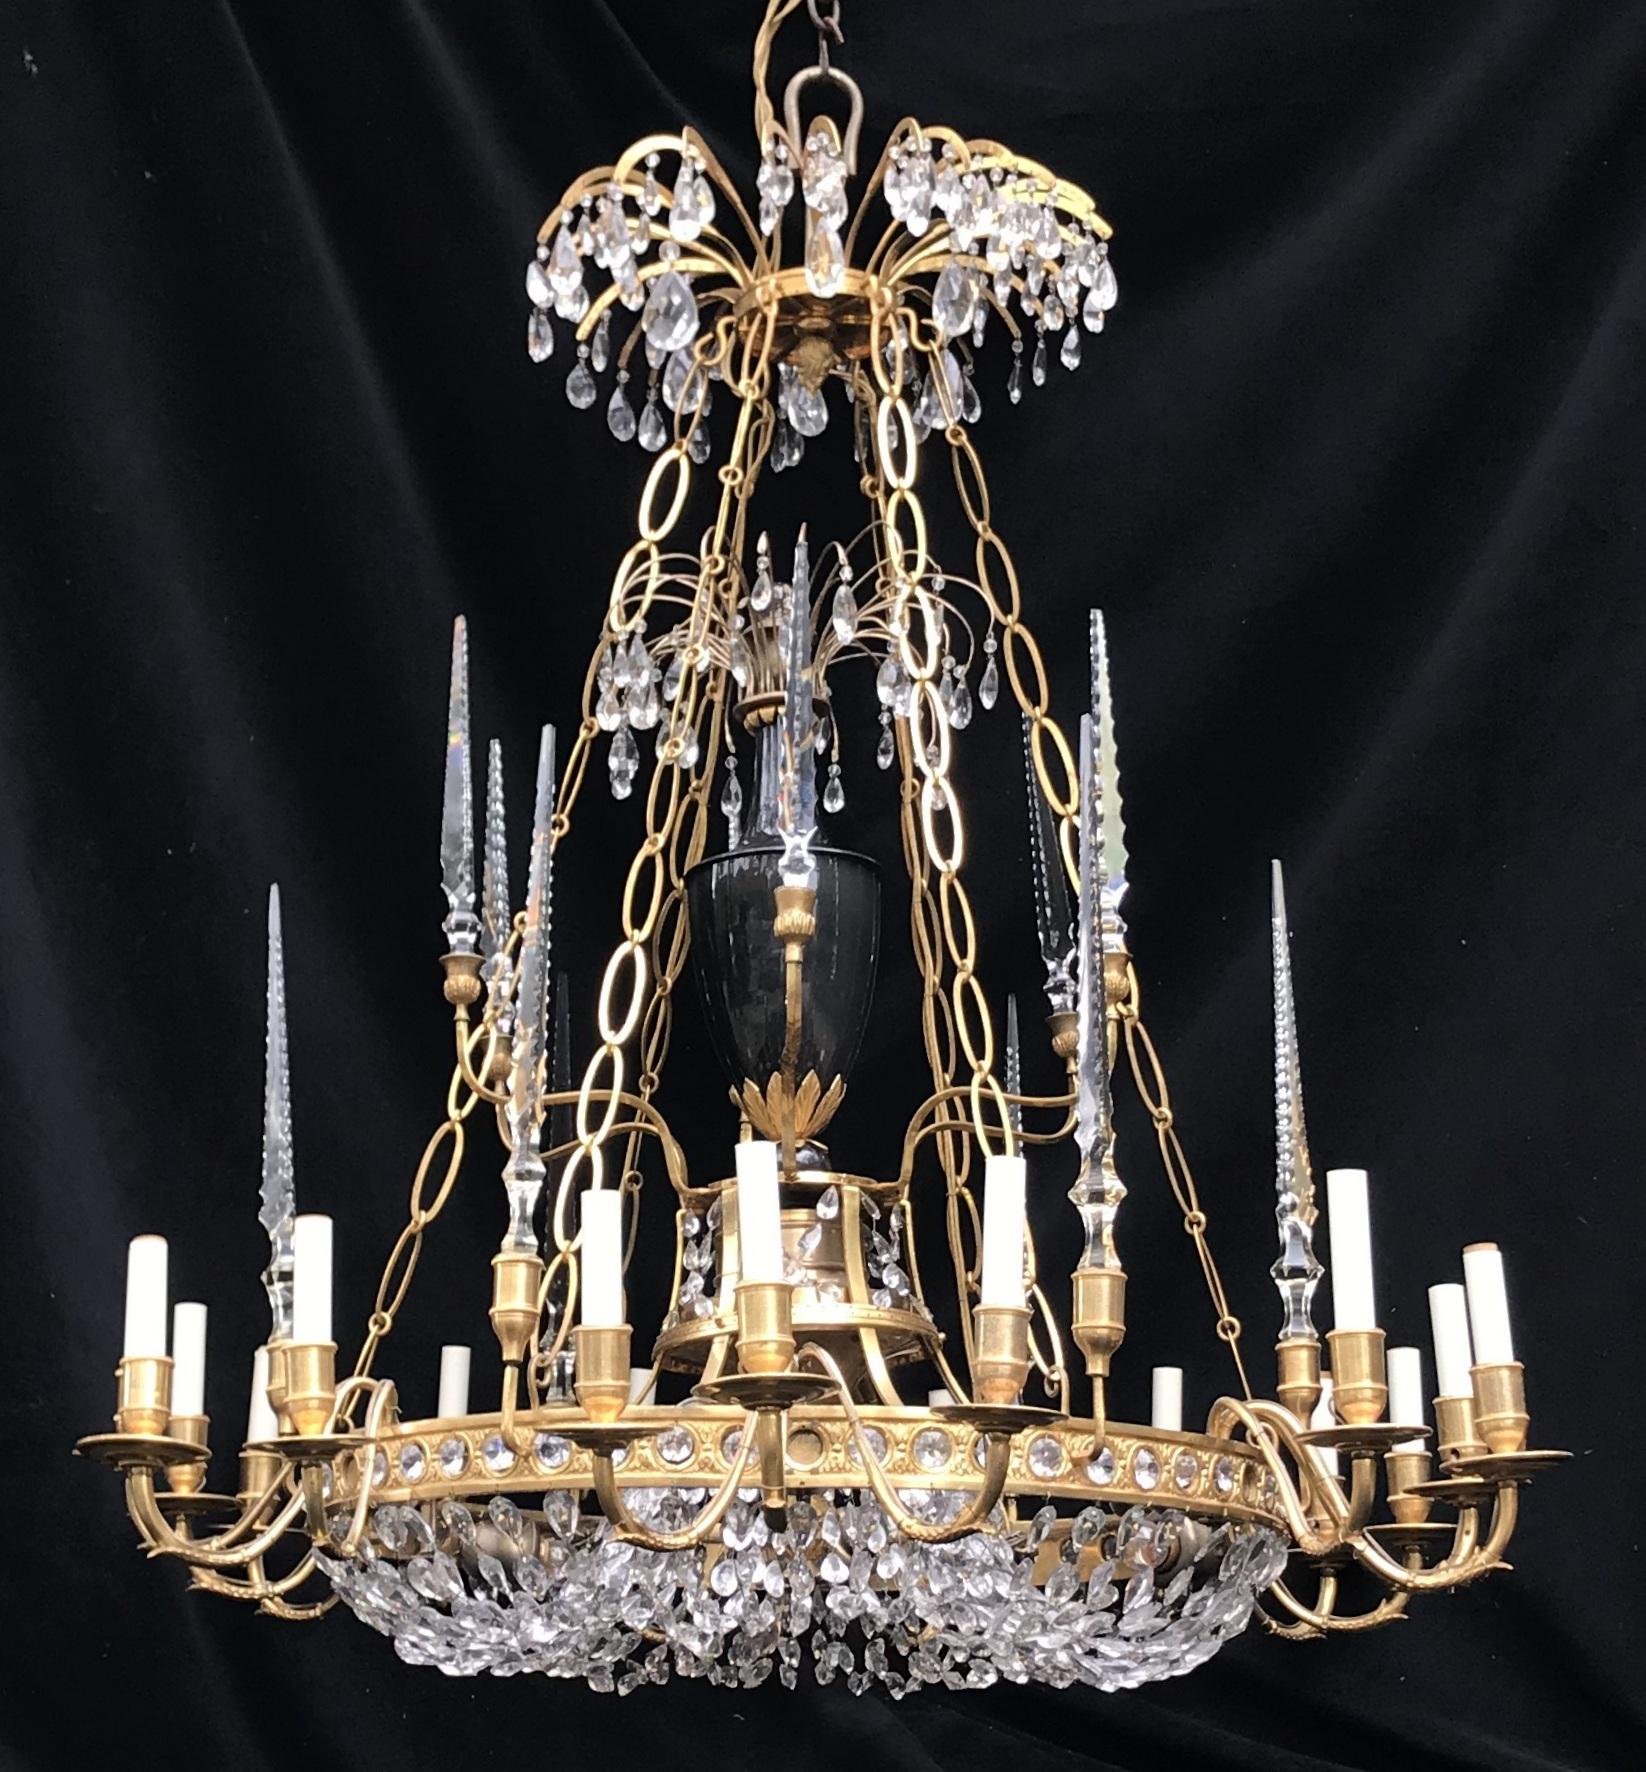 Palatial Baltic Russian Neoclassical Bronze Crystal Porcelain Urn Chandelier For Sale 4